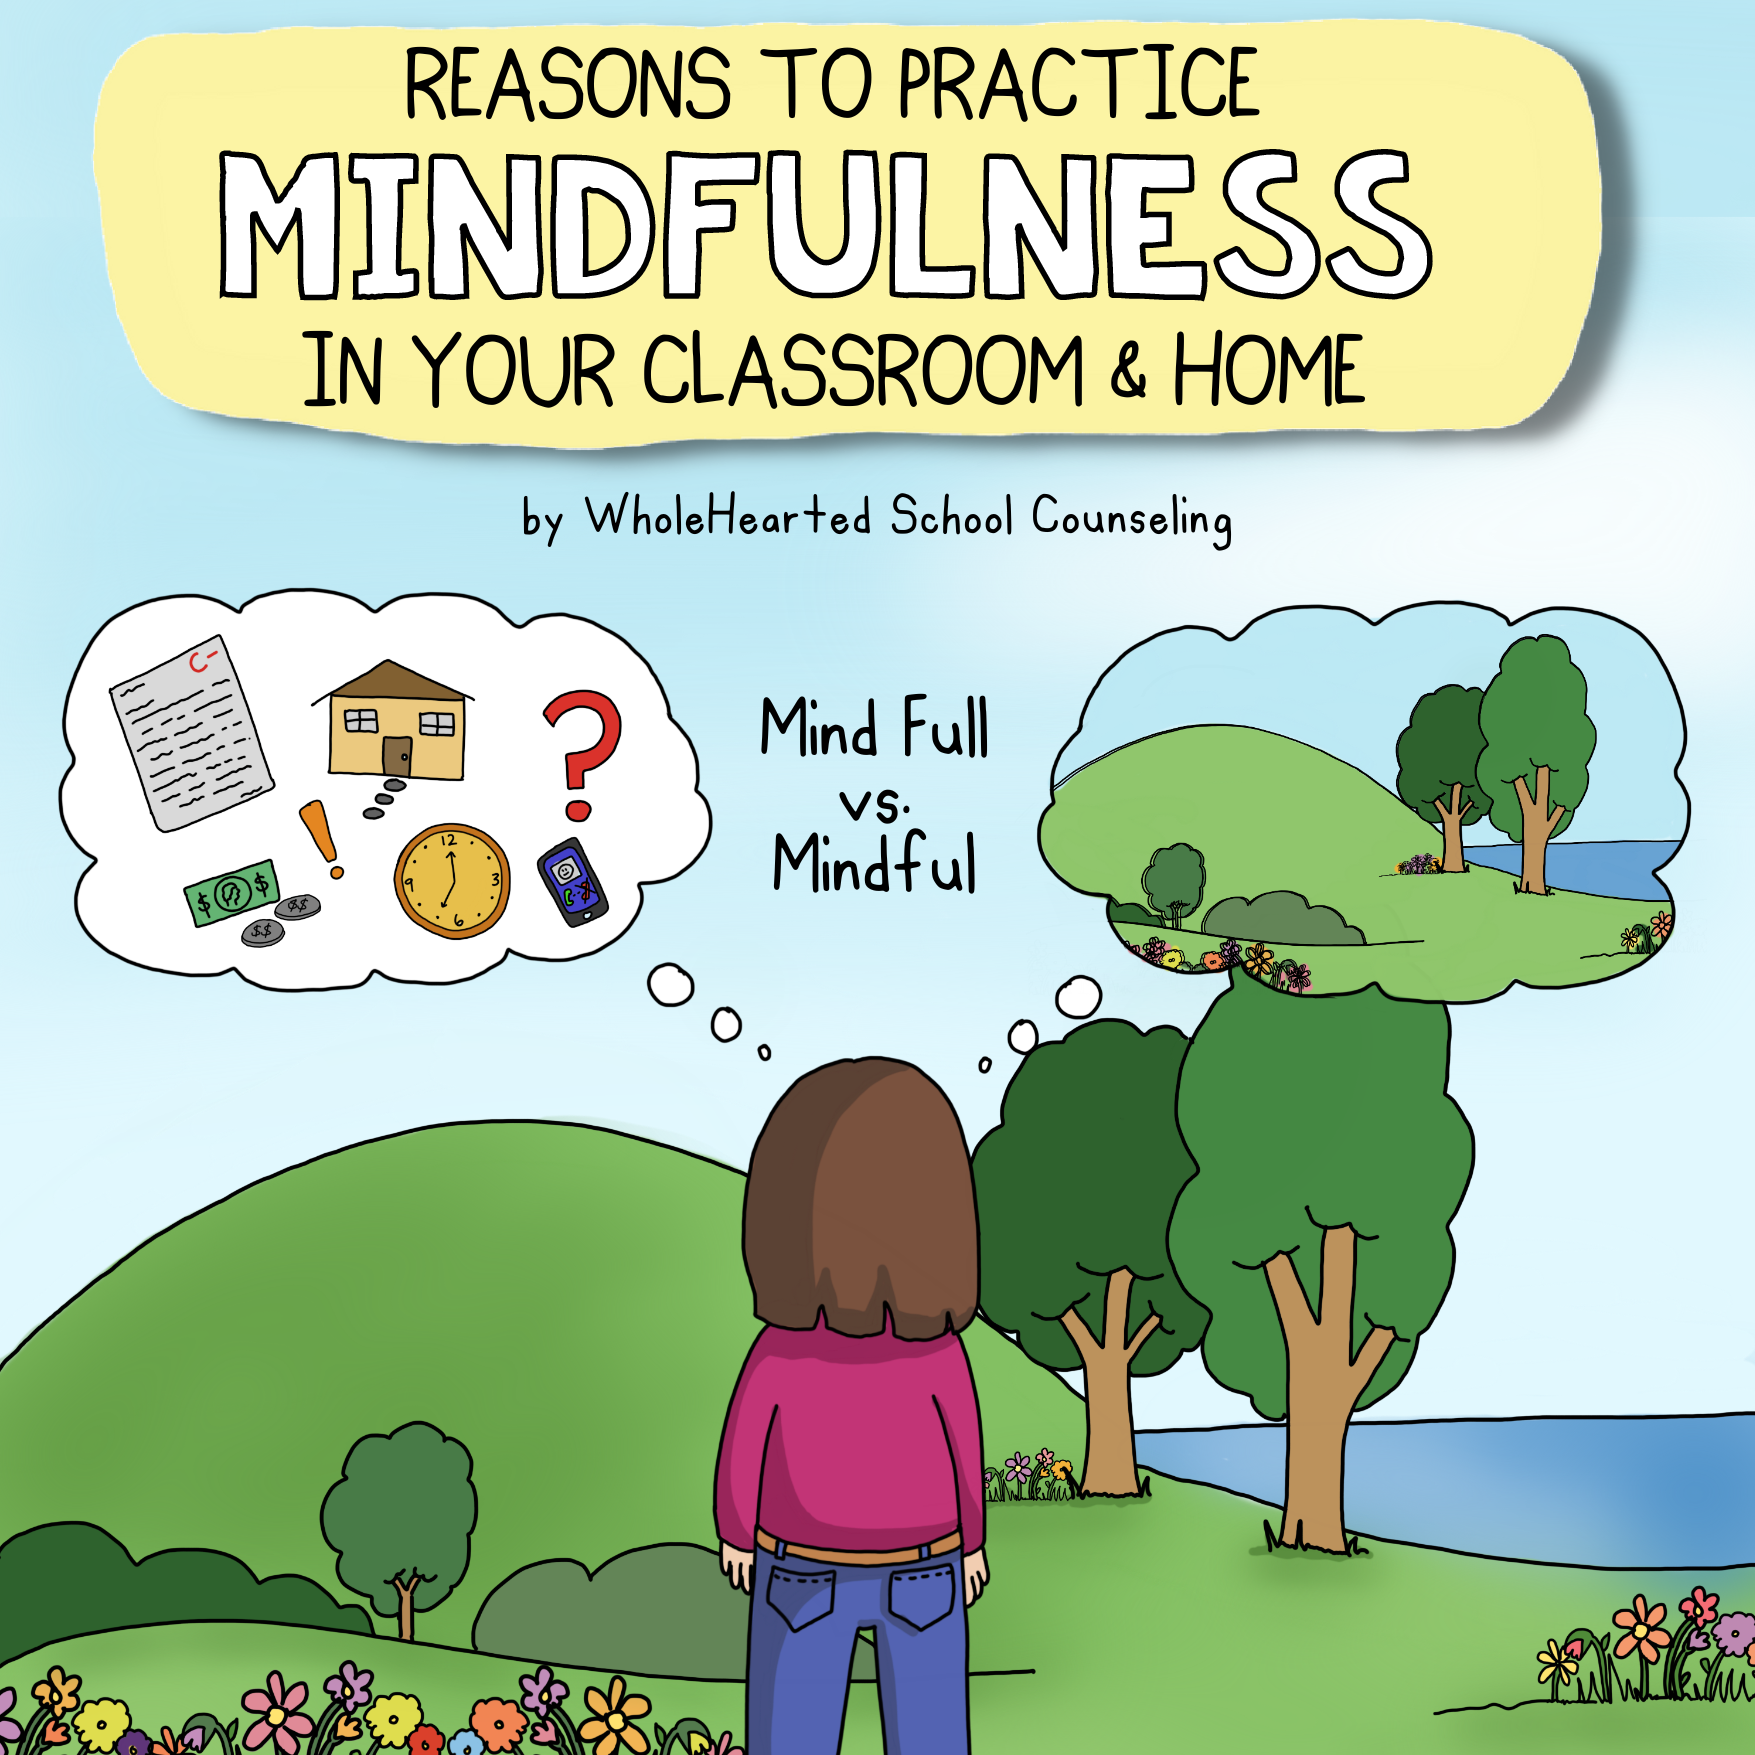 Cartoon showing difference between Mind Full and Mindful